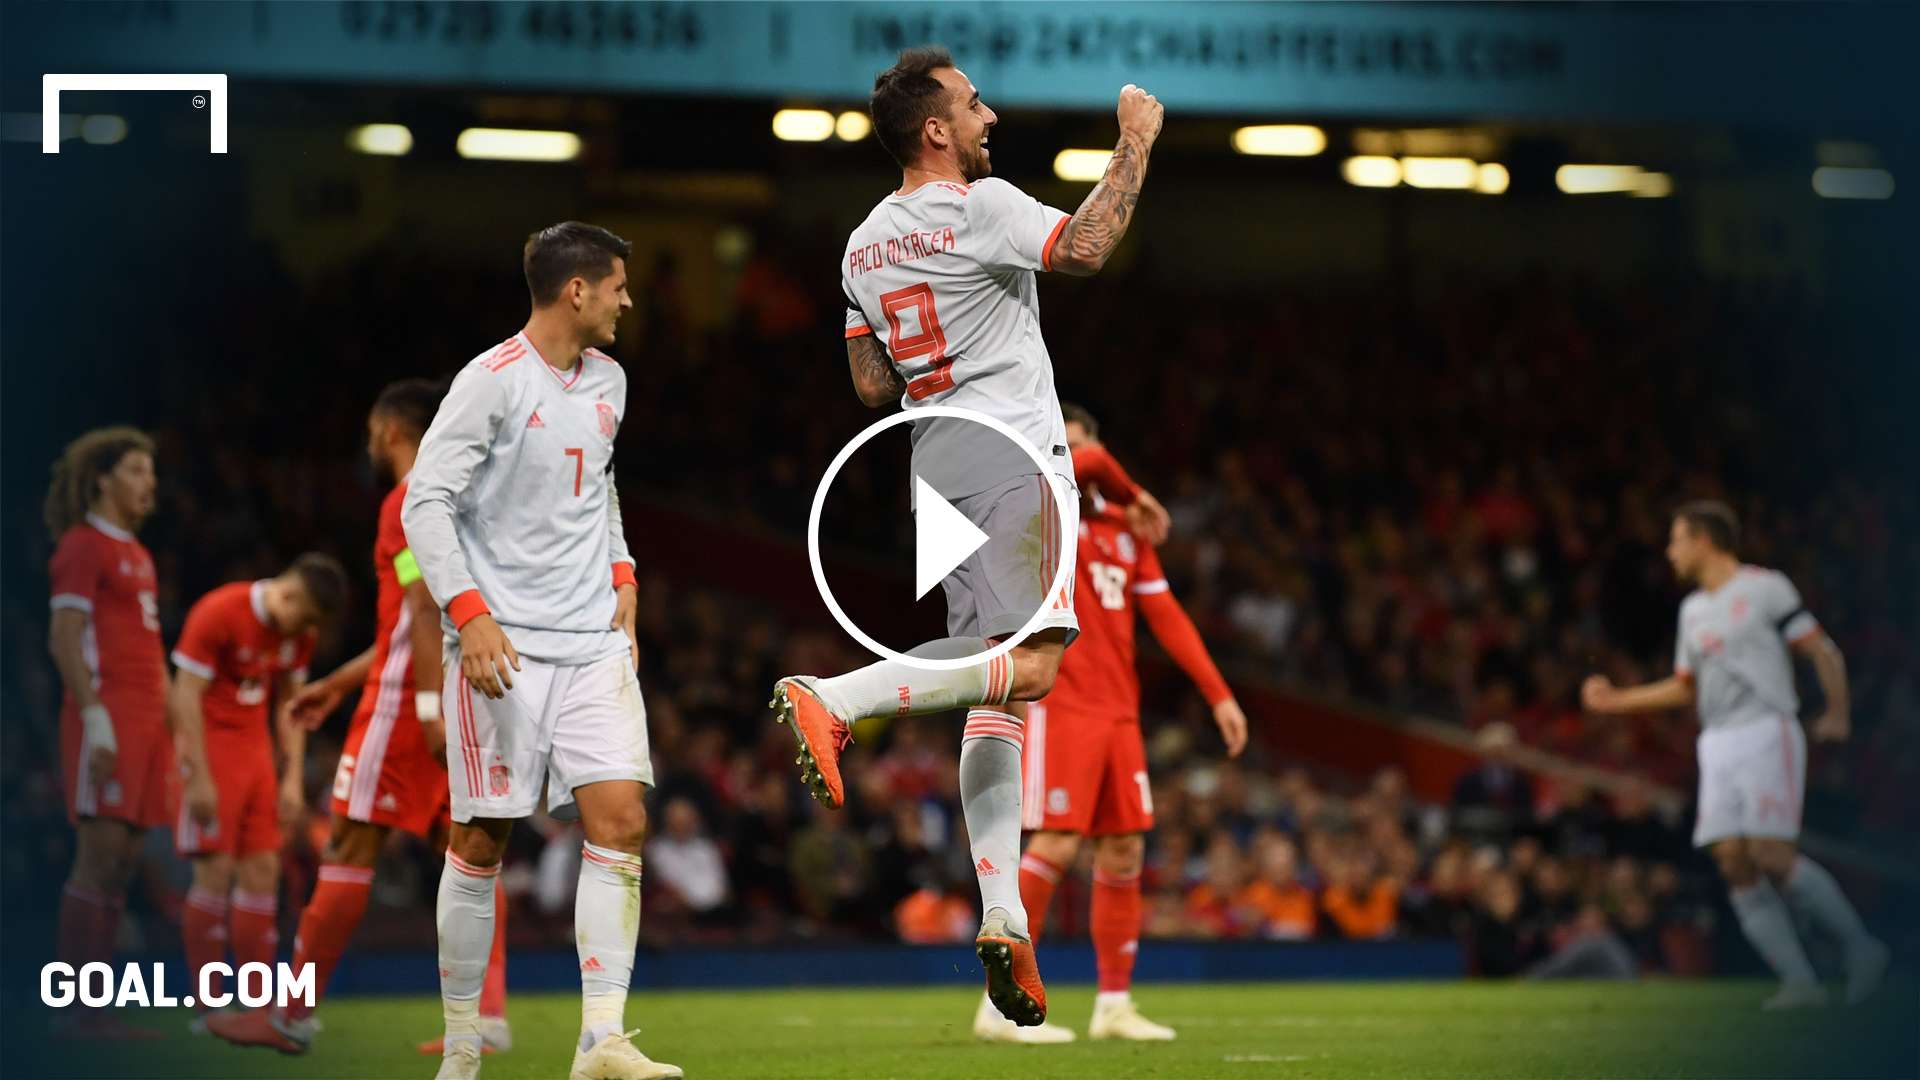 spanien wales highlights paco alcacer